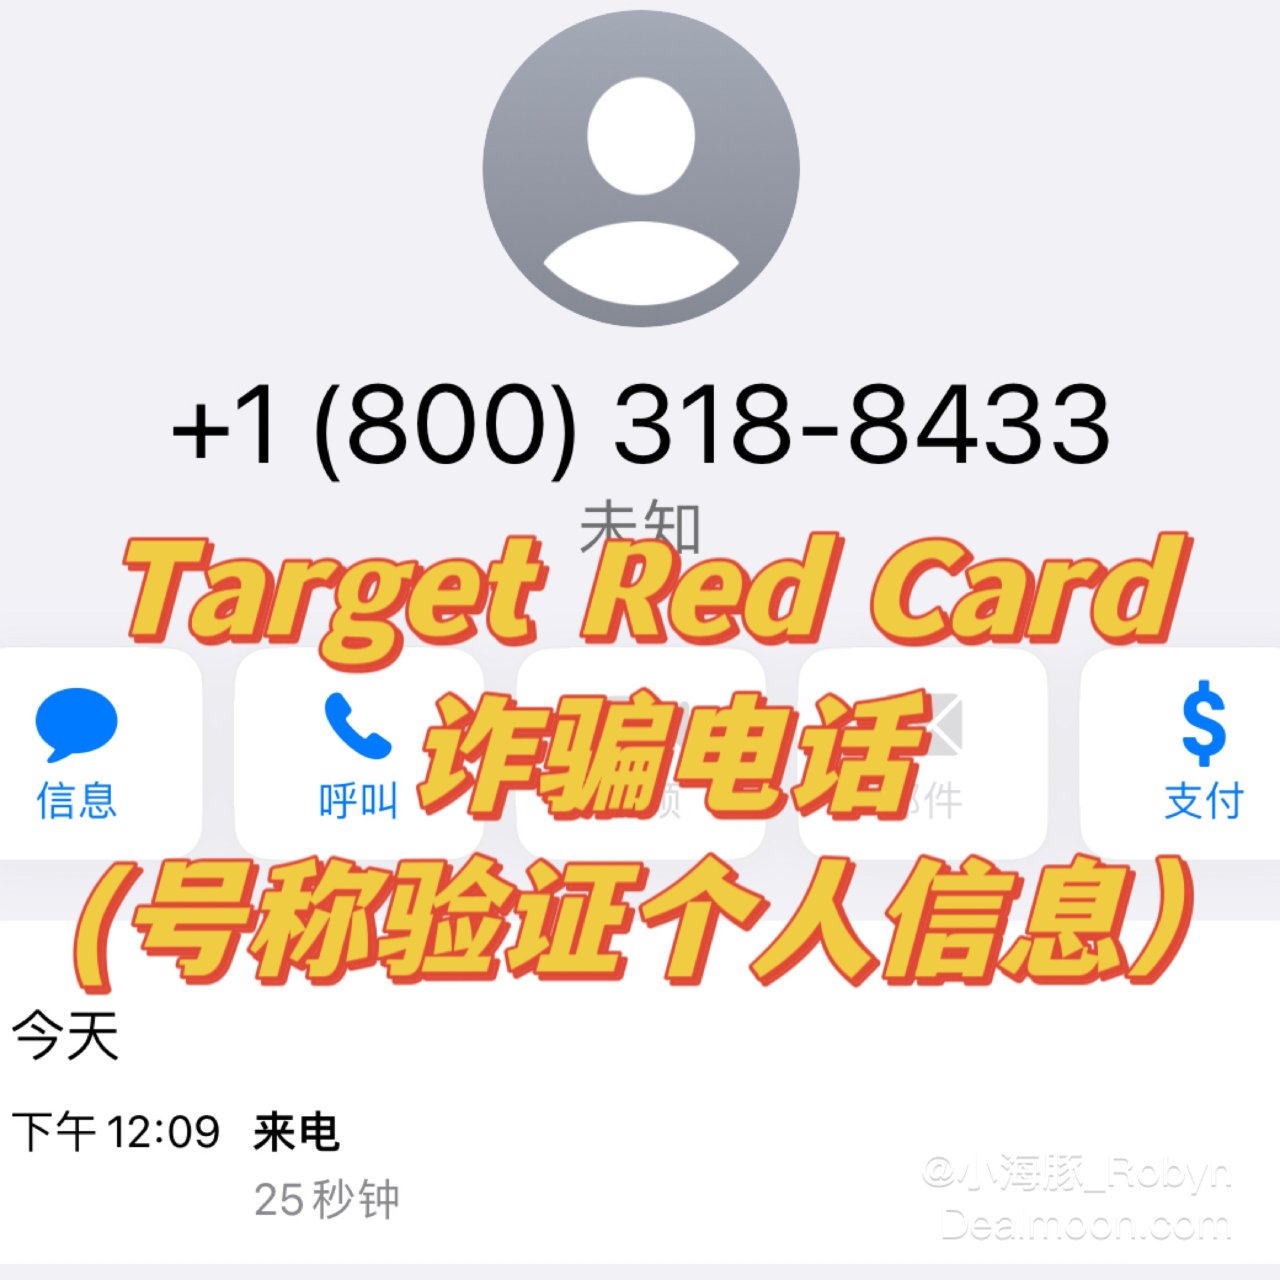 Target Red Card 诈骗电话...